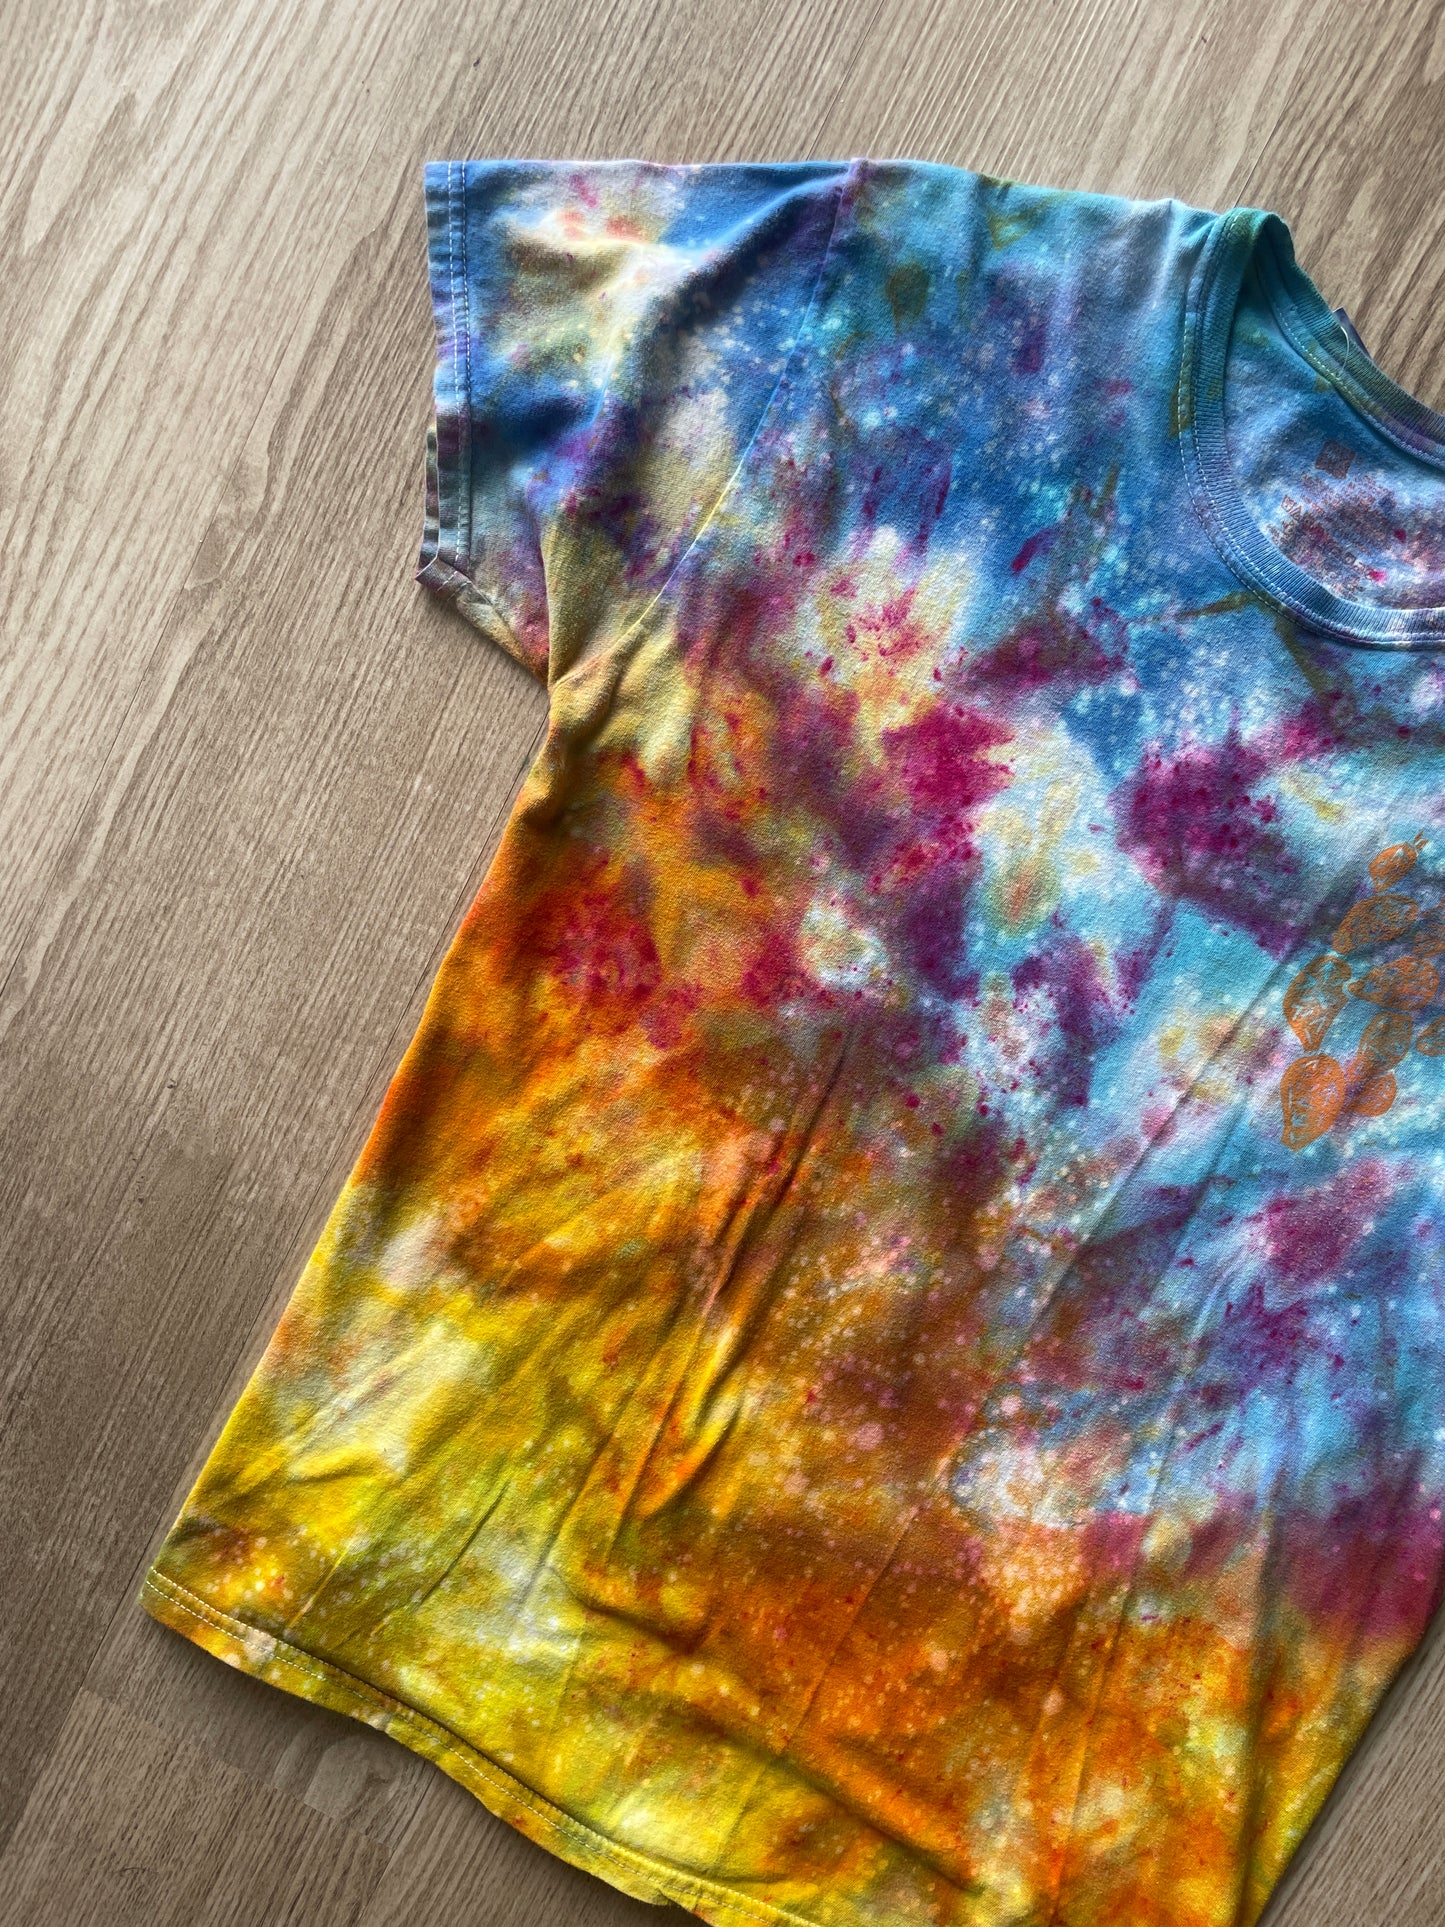 MEDIUM Men’s Prickly Pear Cactus Sunset Galaxy Tie Dye T-Shirt | One-Of-a-Kind Blue, Pink, and Yellow Crumpled Short Sleeve